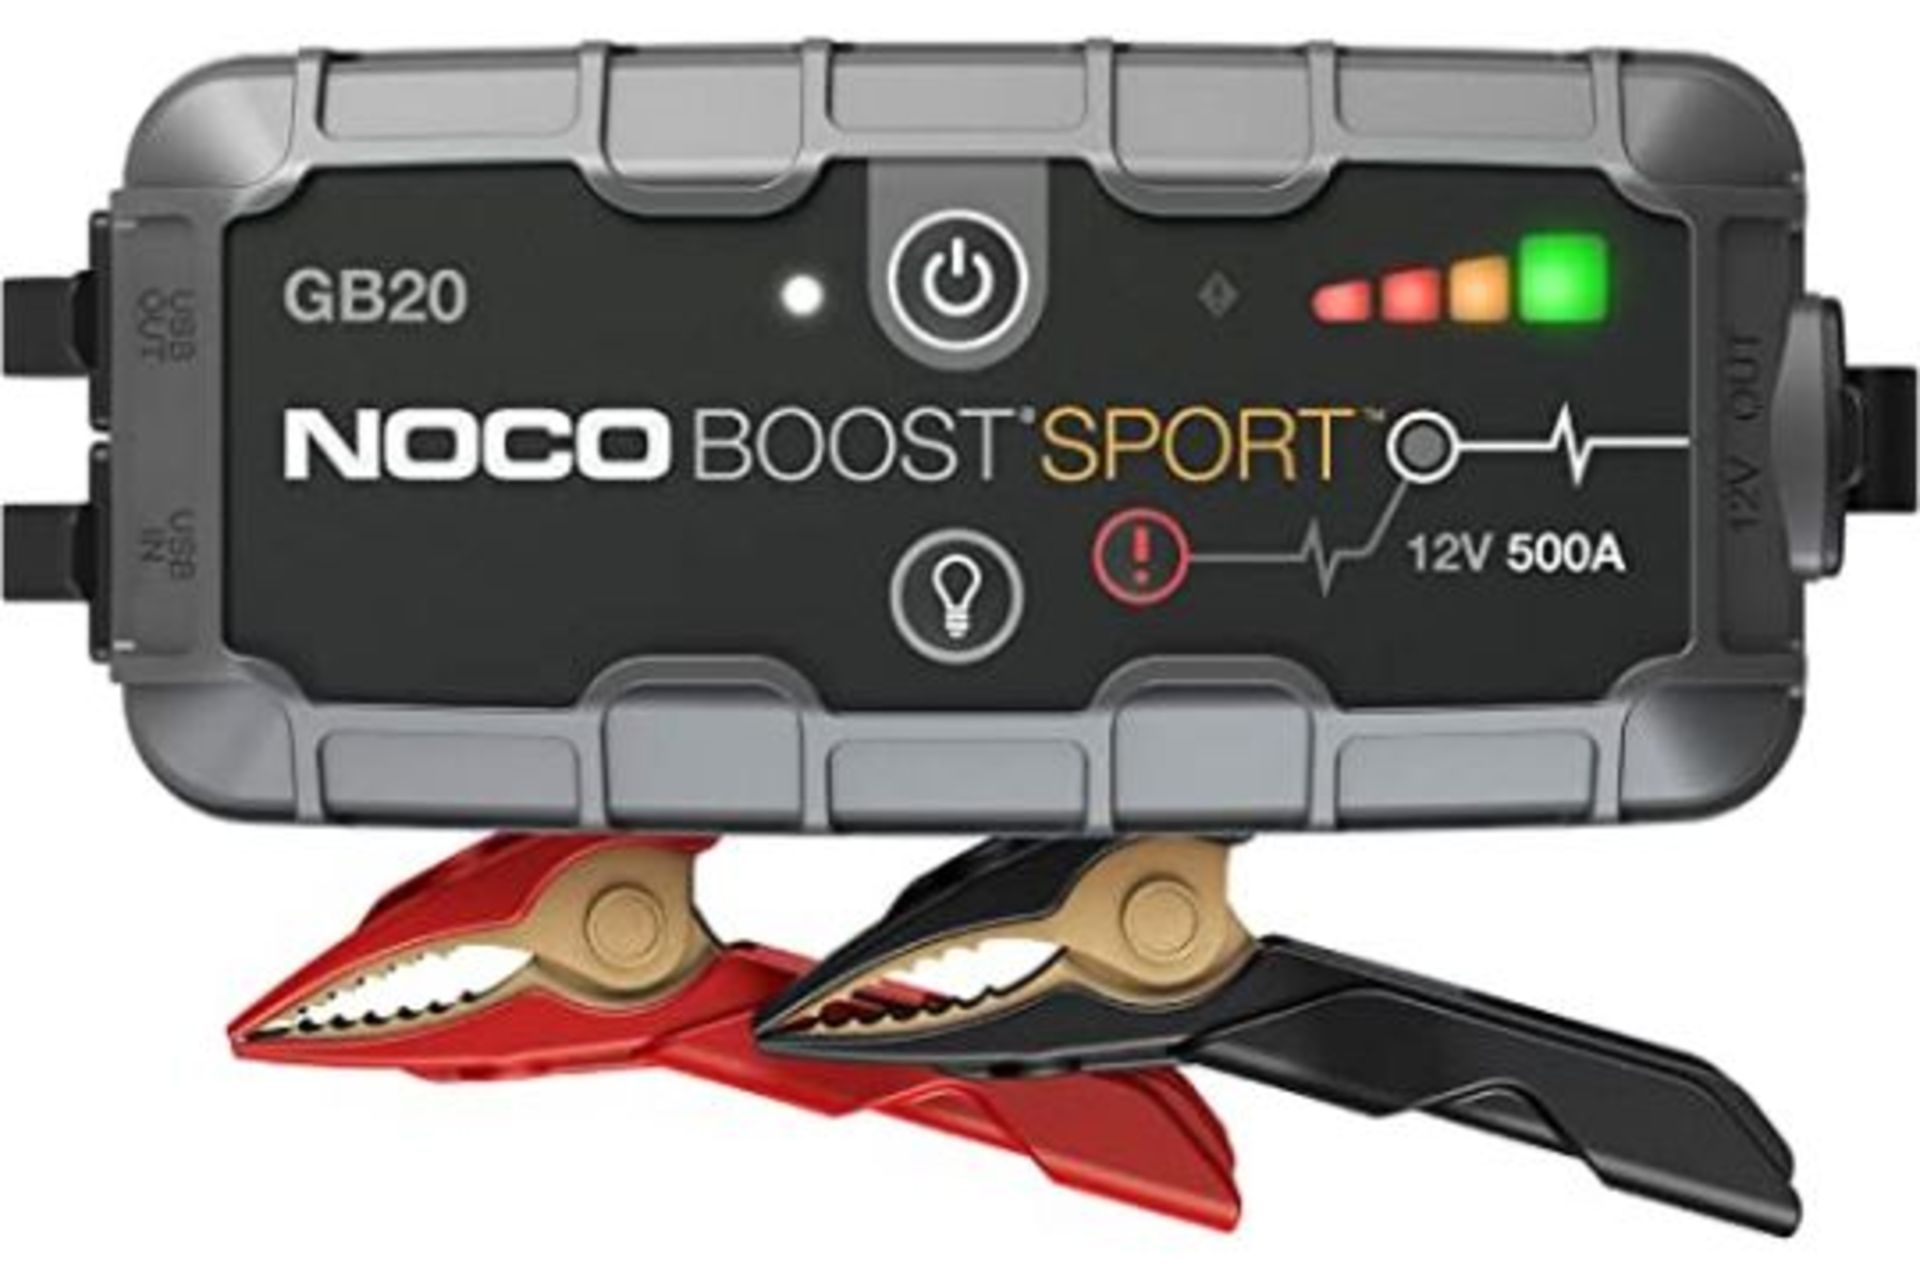 RRP-£88 NOCO Boost Sport GB20 500A 12V UltraSafe Portable Lithium Jump Starter, Car Battery Booster